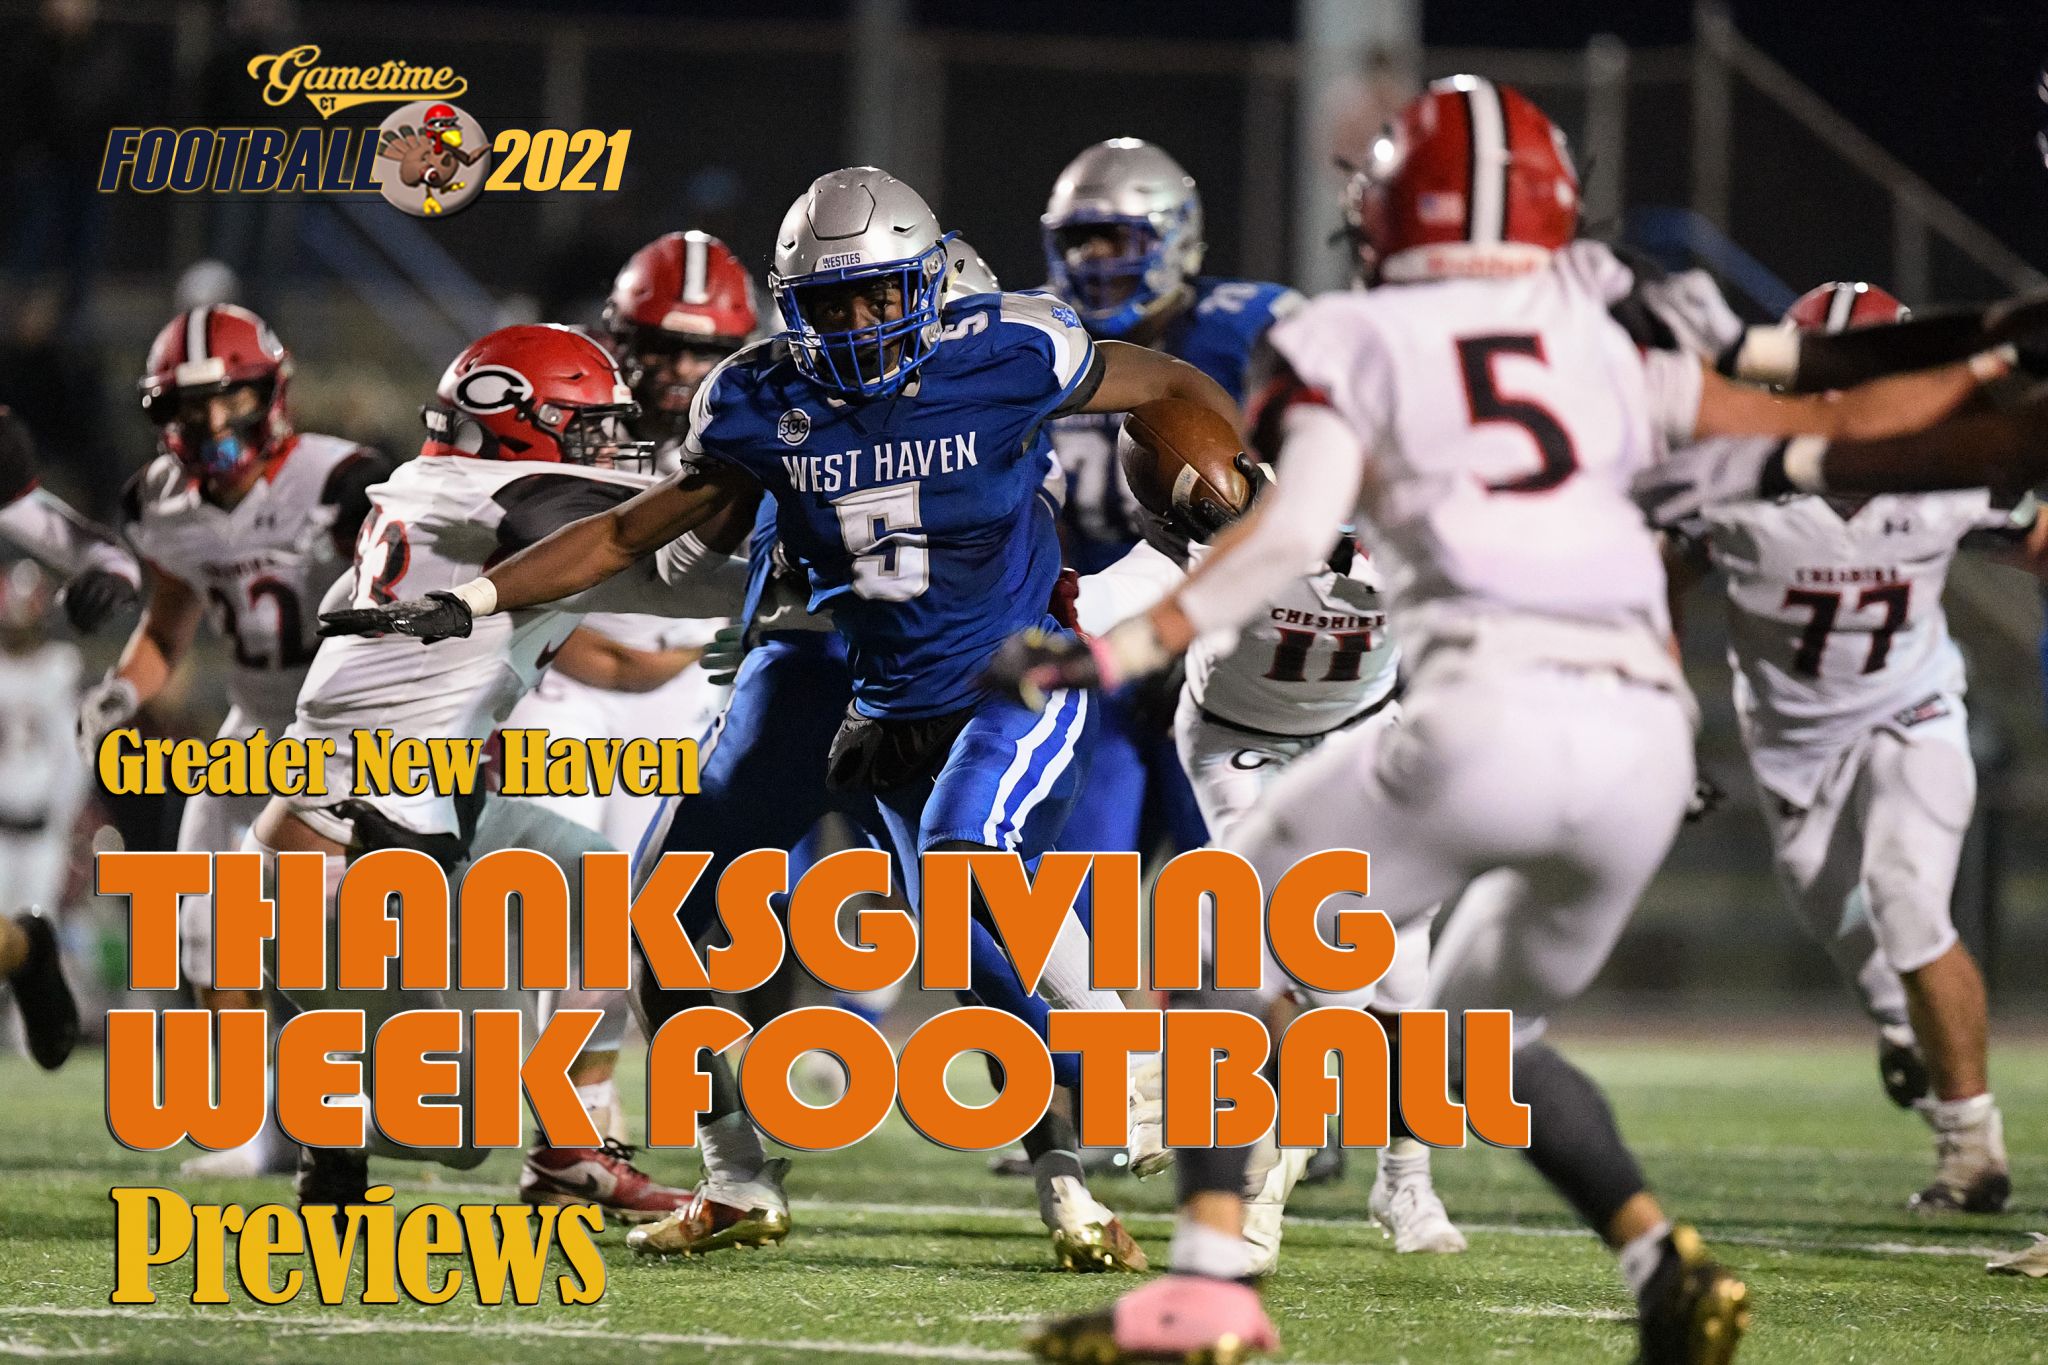 Football capsules for Thanksgiving football games in Greater New Haven 2022